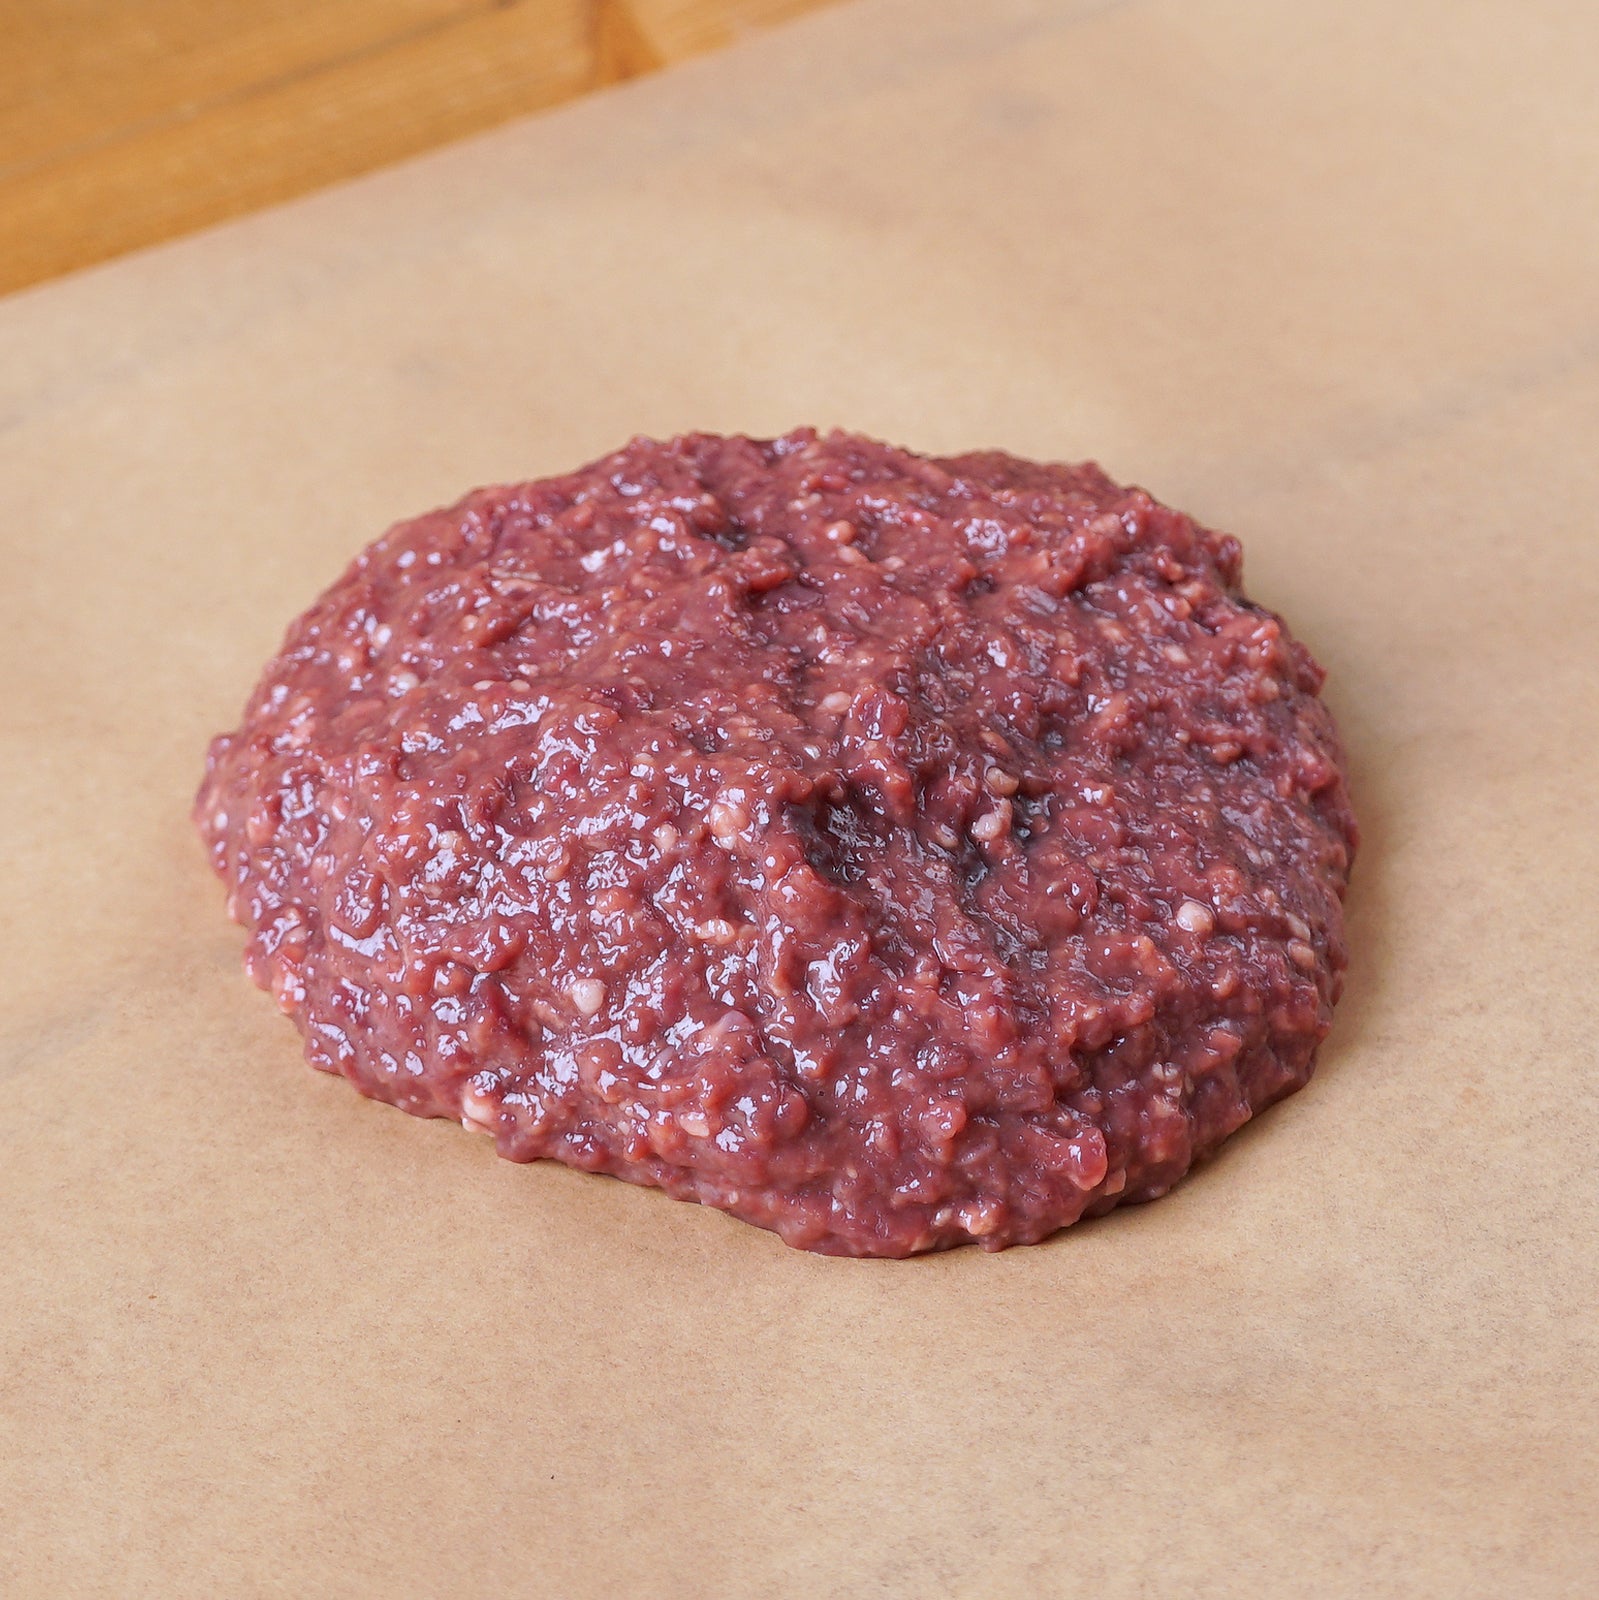 Free-Range Lamb Mince / Ground Lamb with Liver and Heart Meat from New Zealand (200g) - Horizon Farms